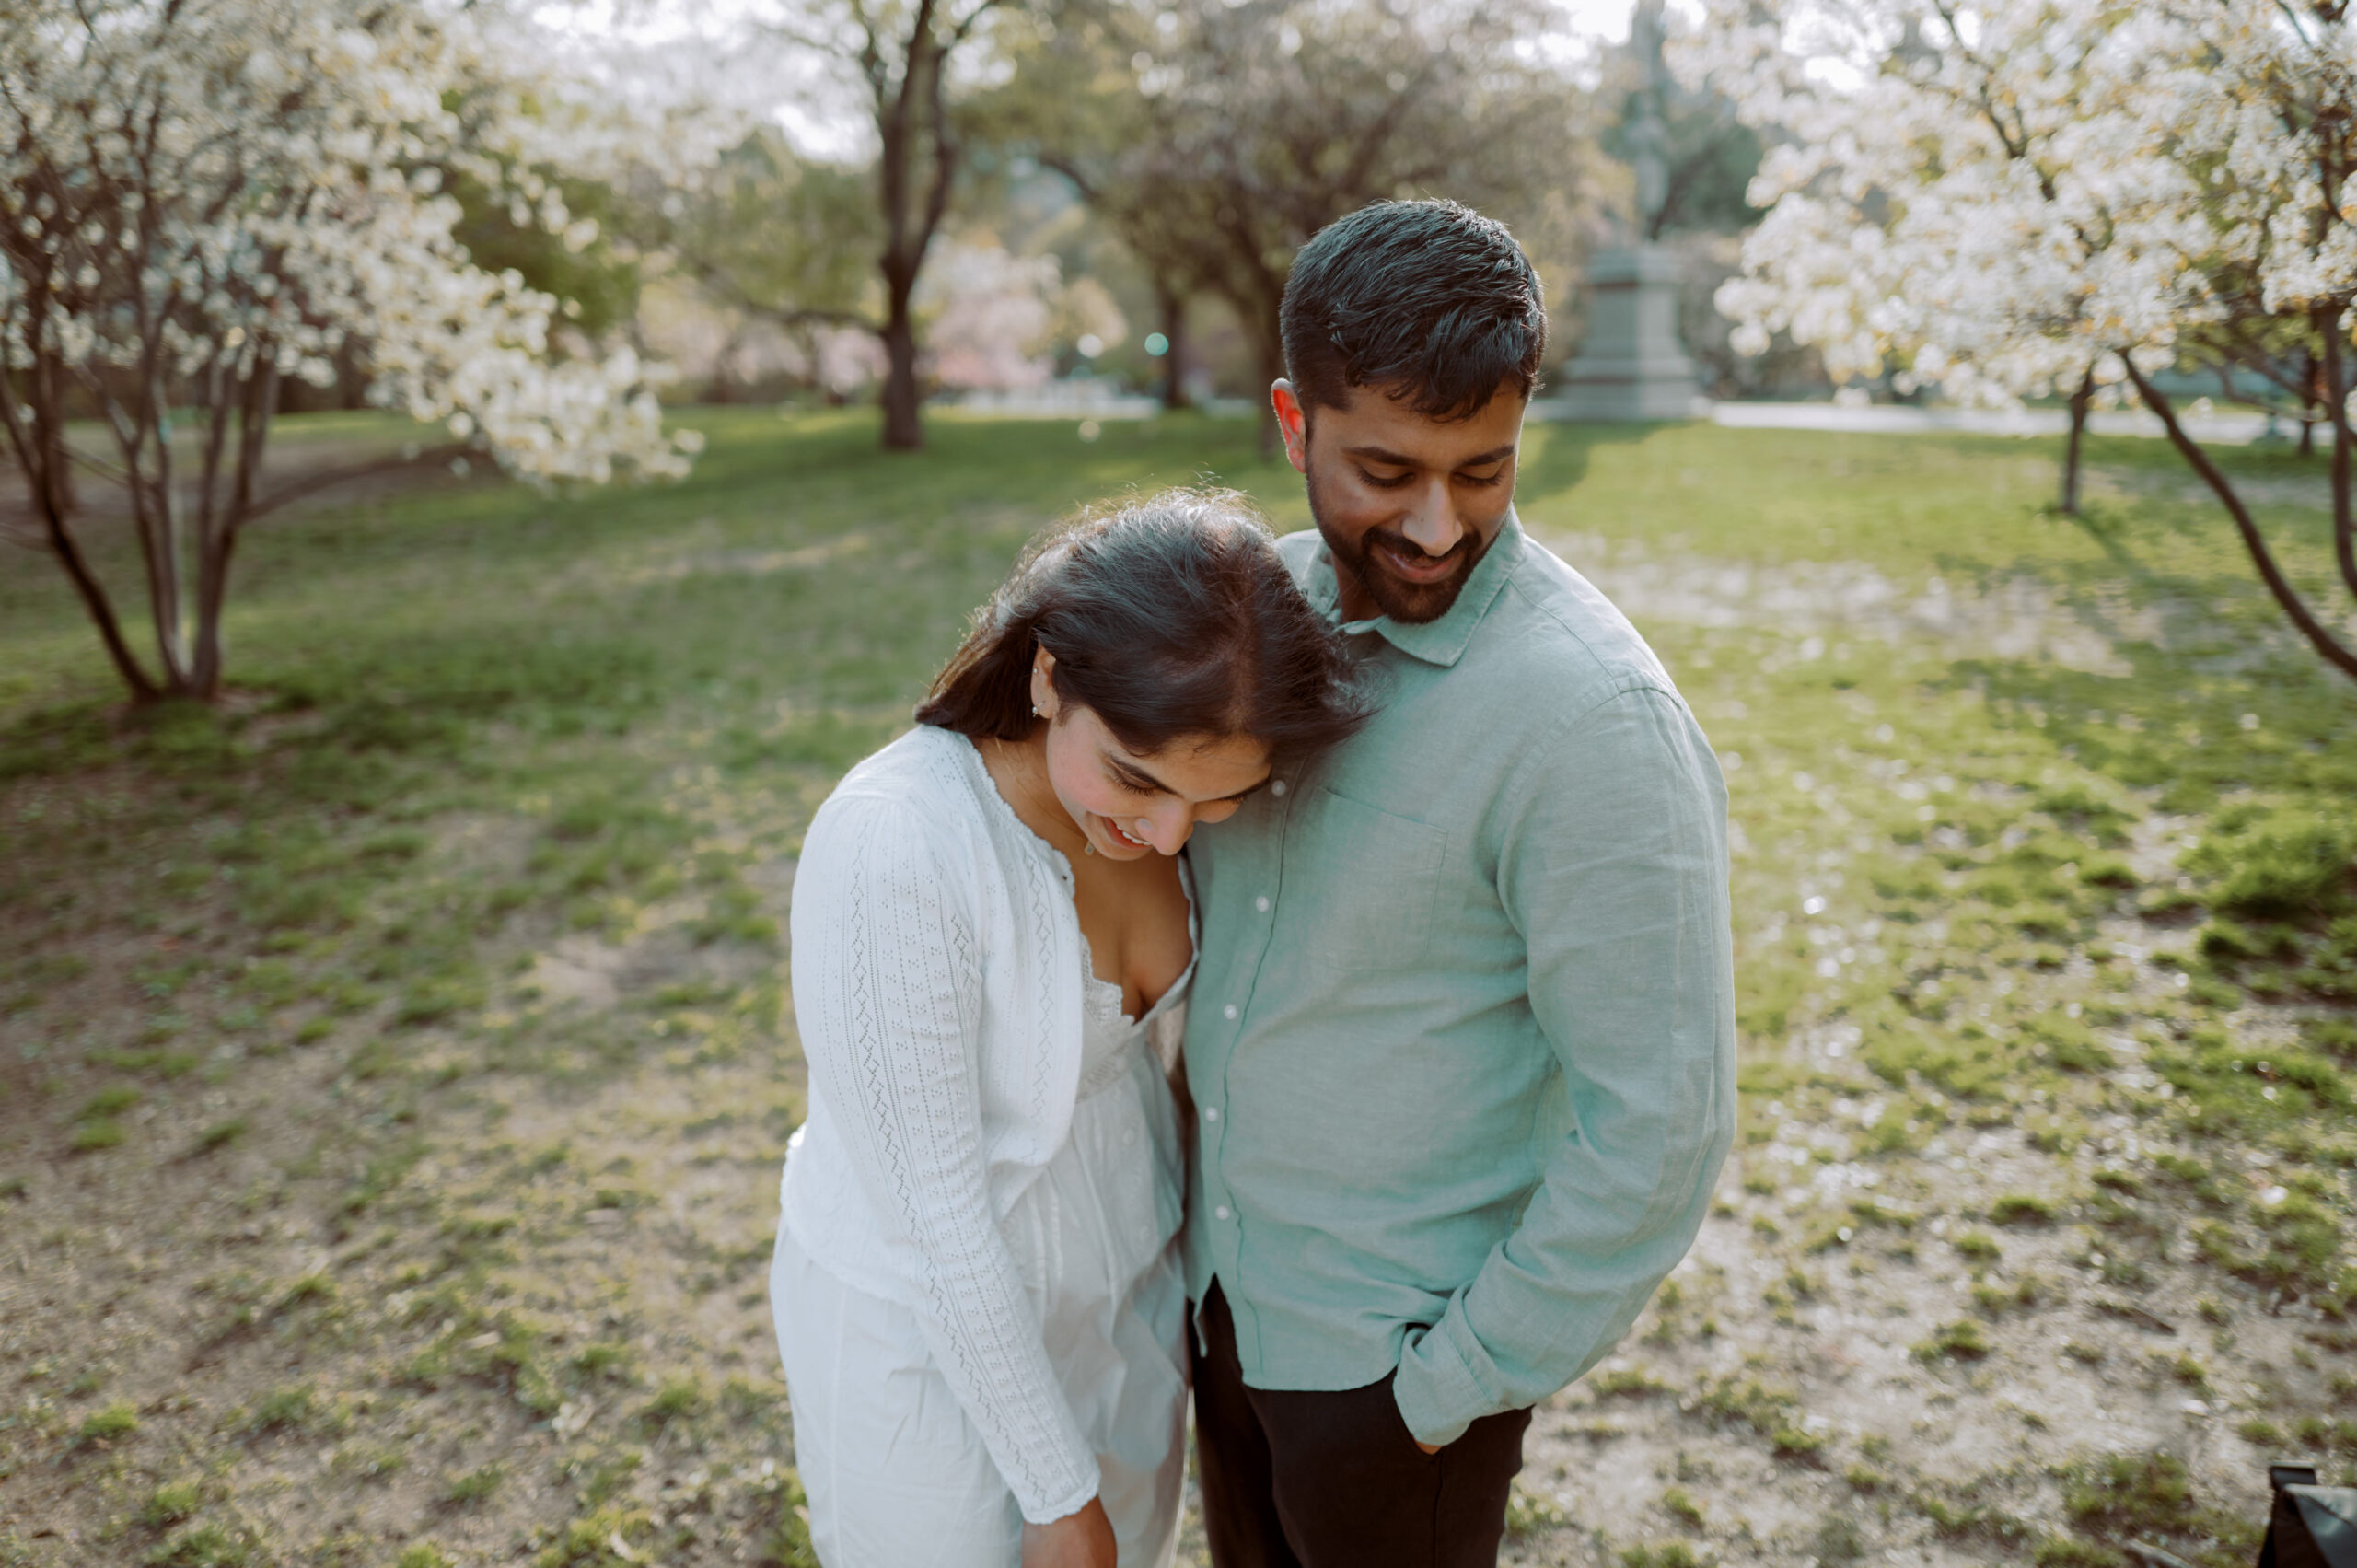 The engaged couple are happily looking downwards in a park during spring time. Engagement sessions image by Jenny Fu Studio